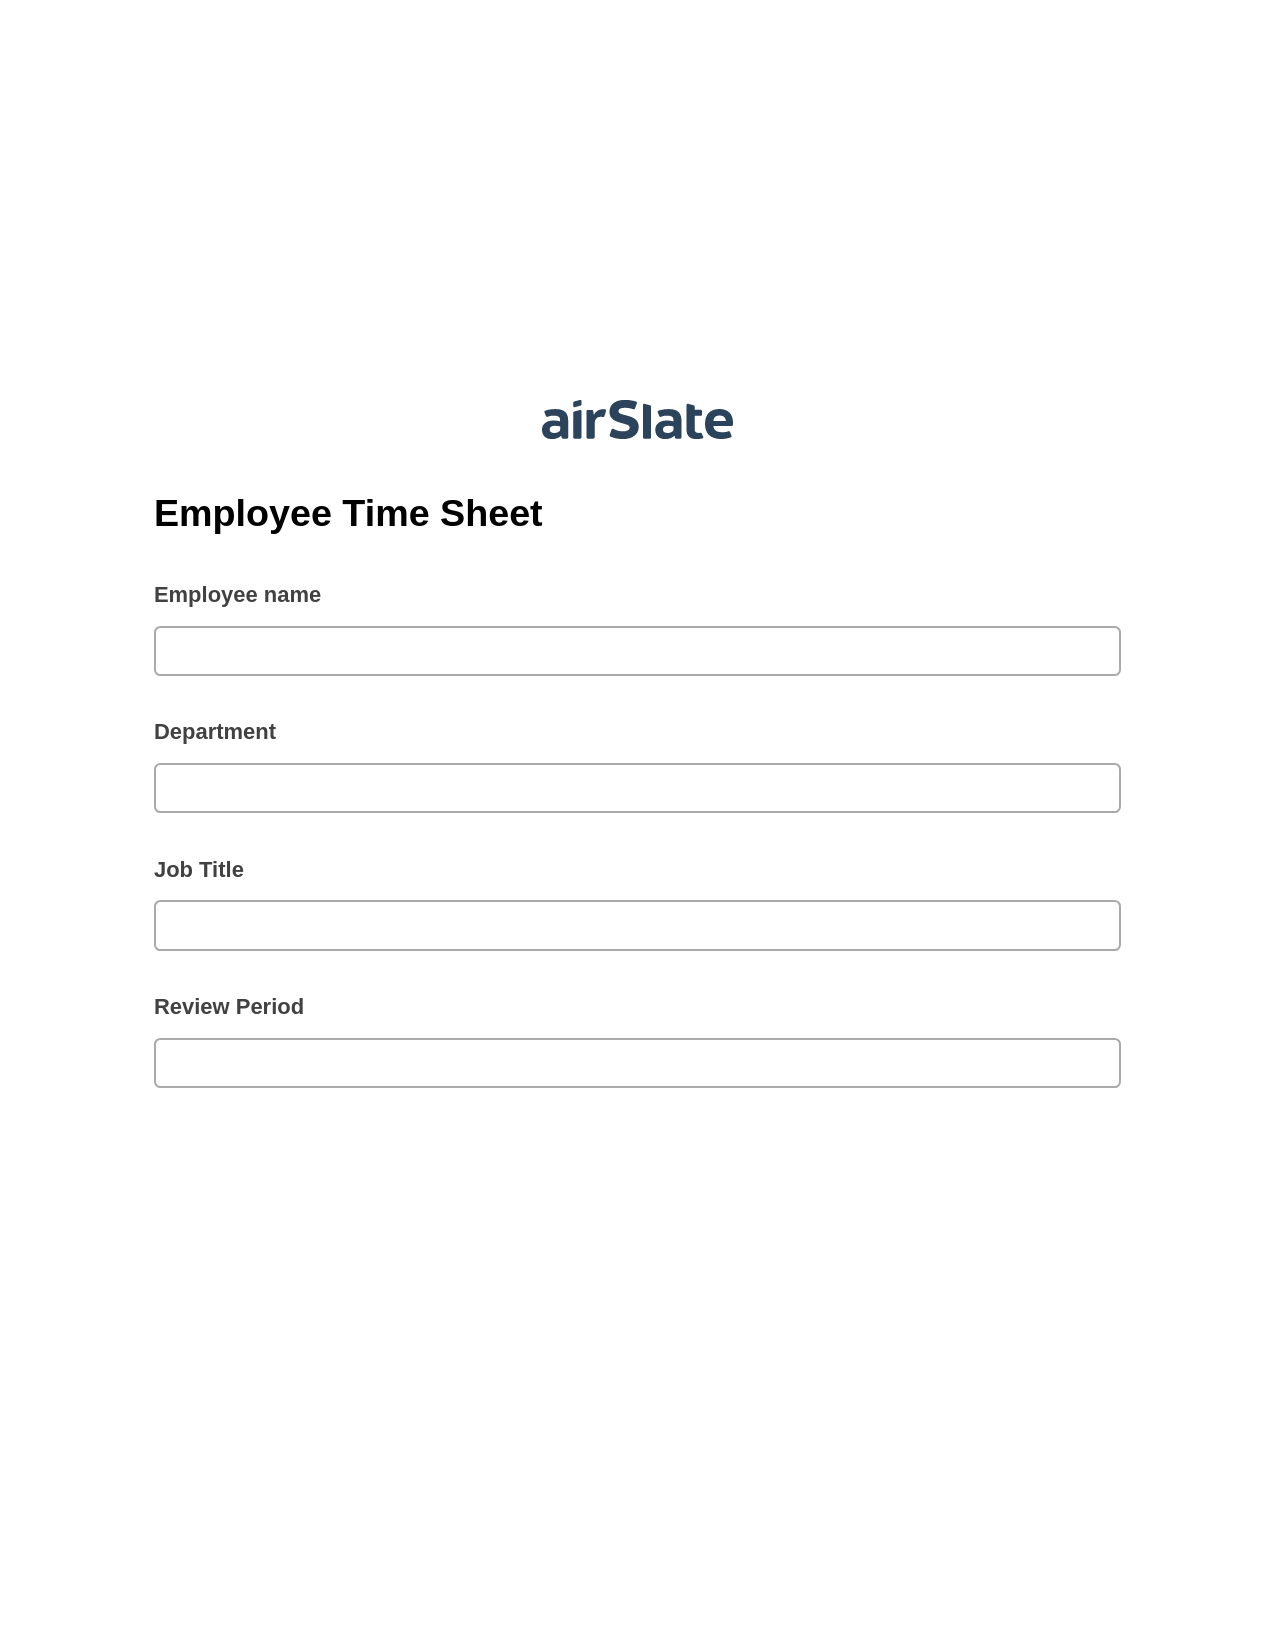 Employee Time Sheet Pre-fill from Google Sheets Bot, Create Salesforce Records Bot, Export to Salesforce Record Bot